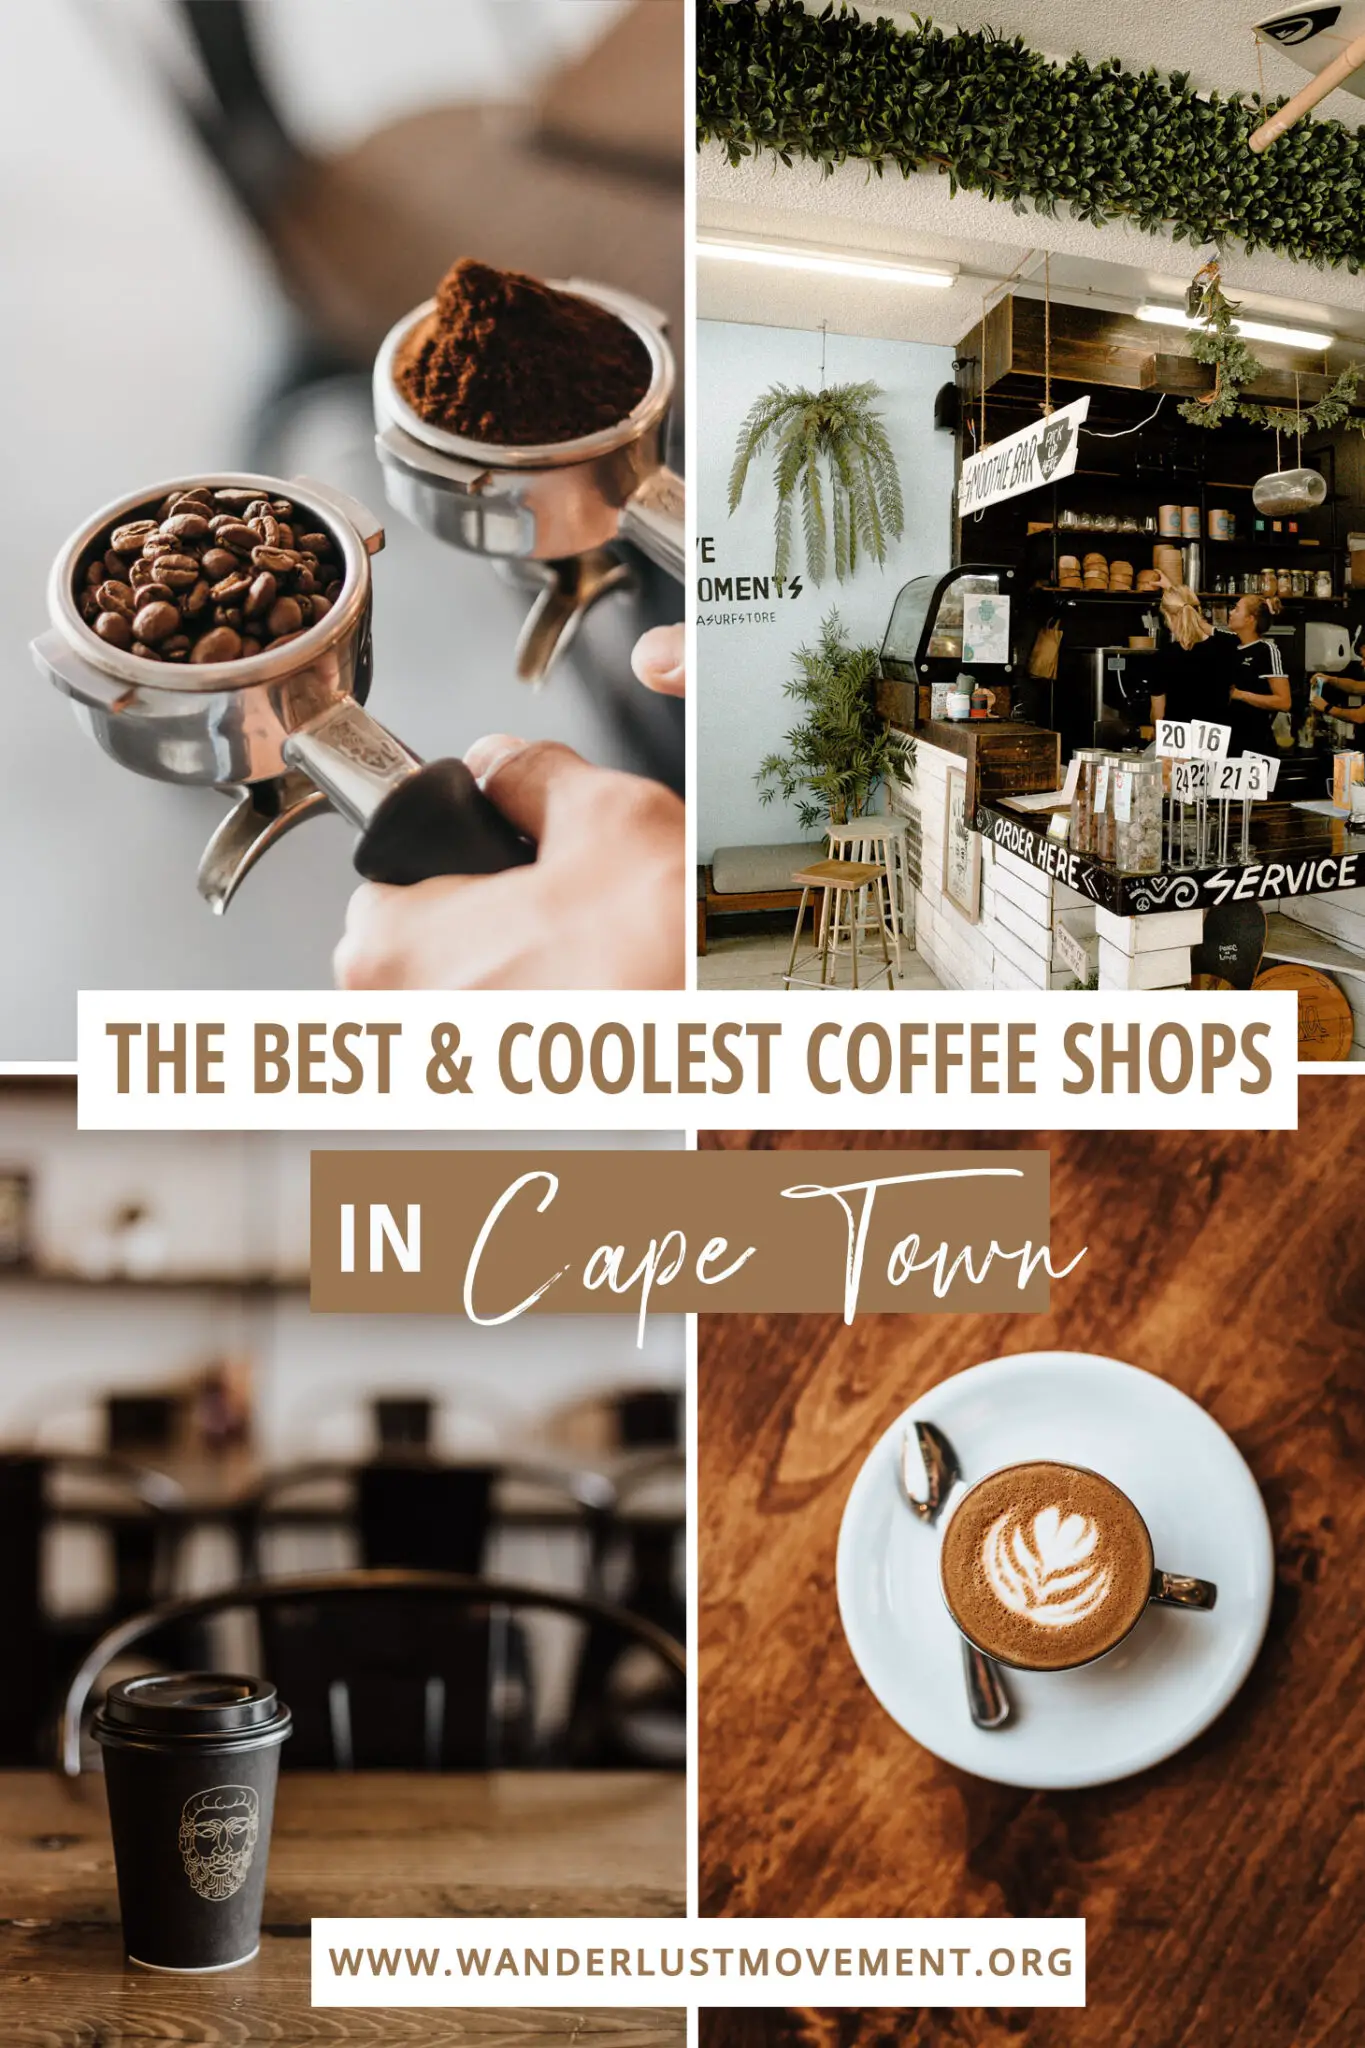 The Coolest & Best Coffee Shops in Cape Town